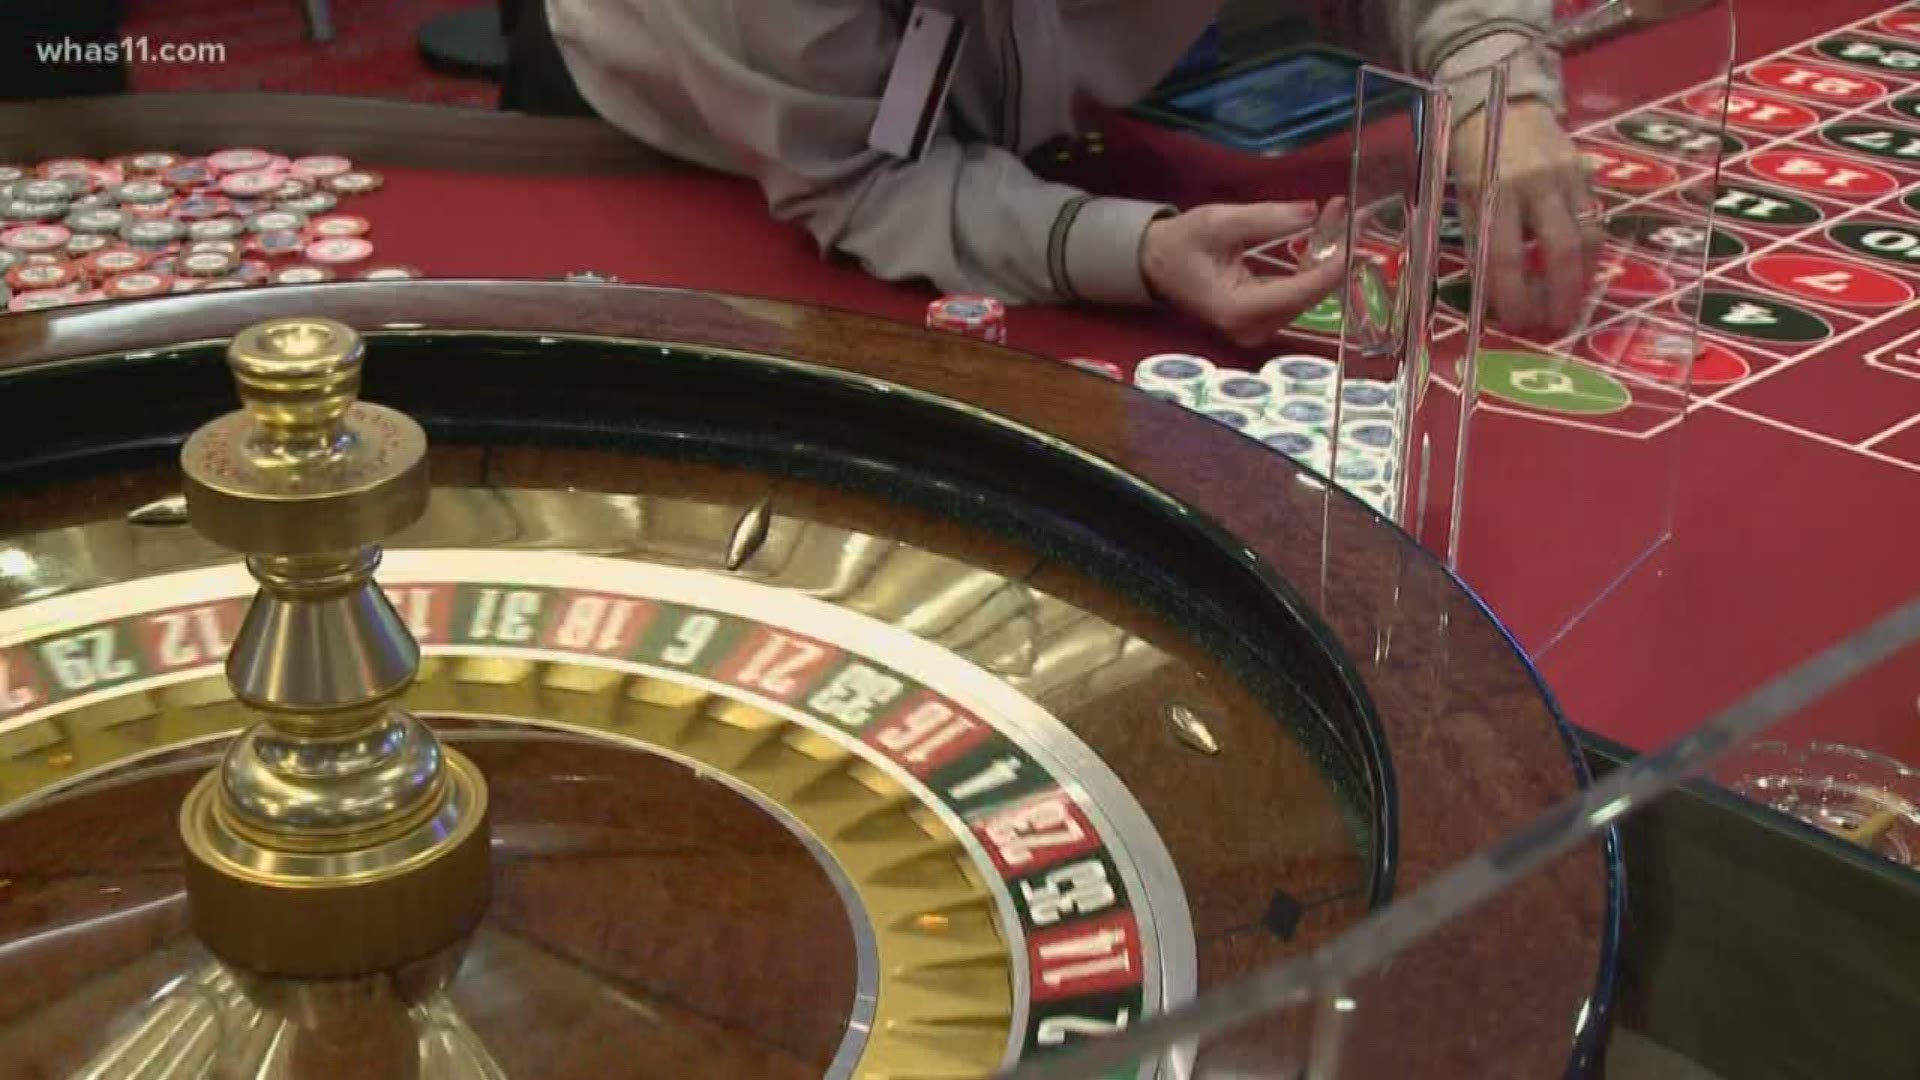 Officials are closing down gaming and casino sites as coronavirus cases in Kentucky and Indiana rise.